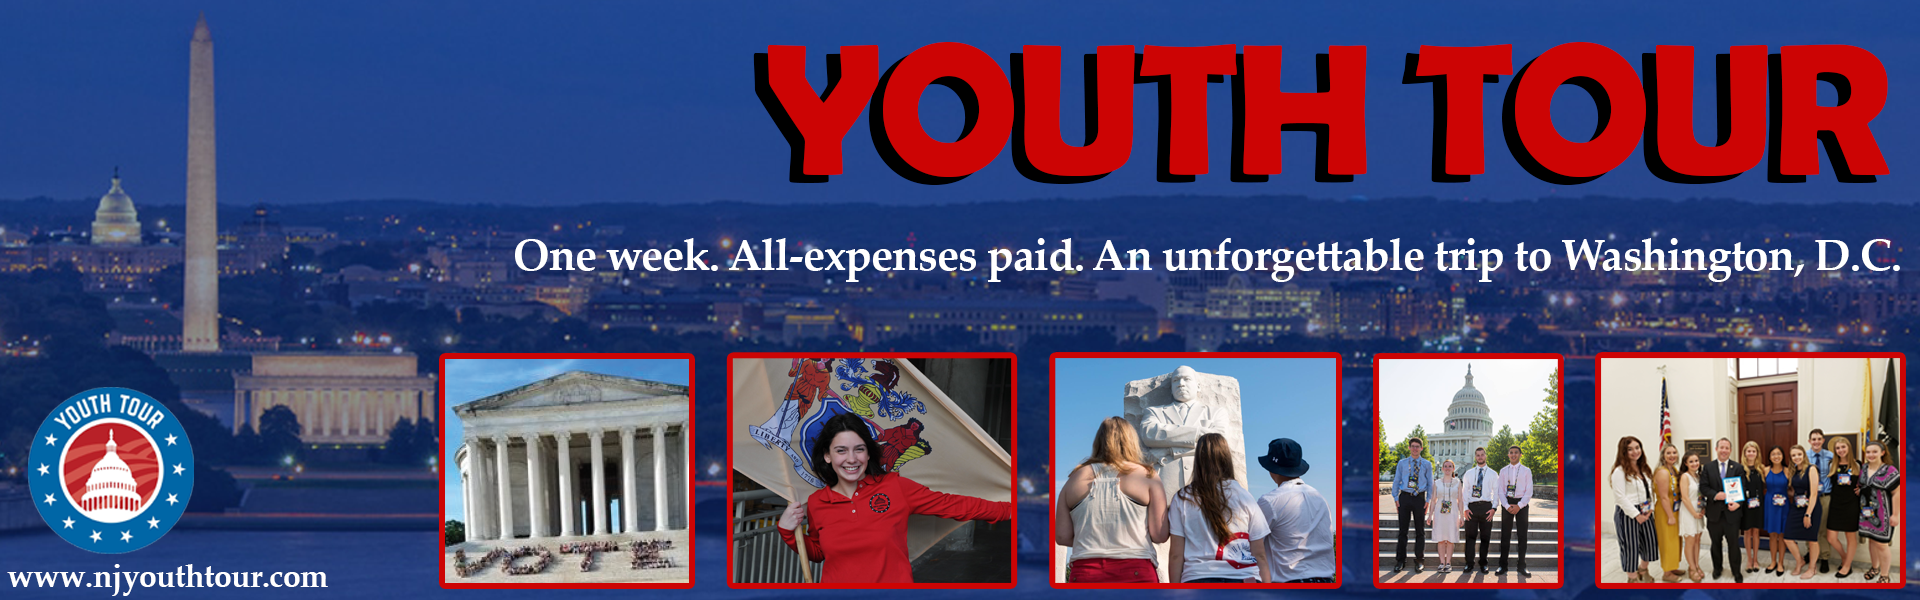 Youth Tour Header